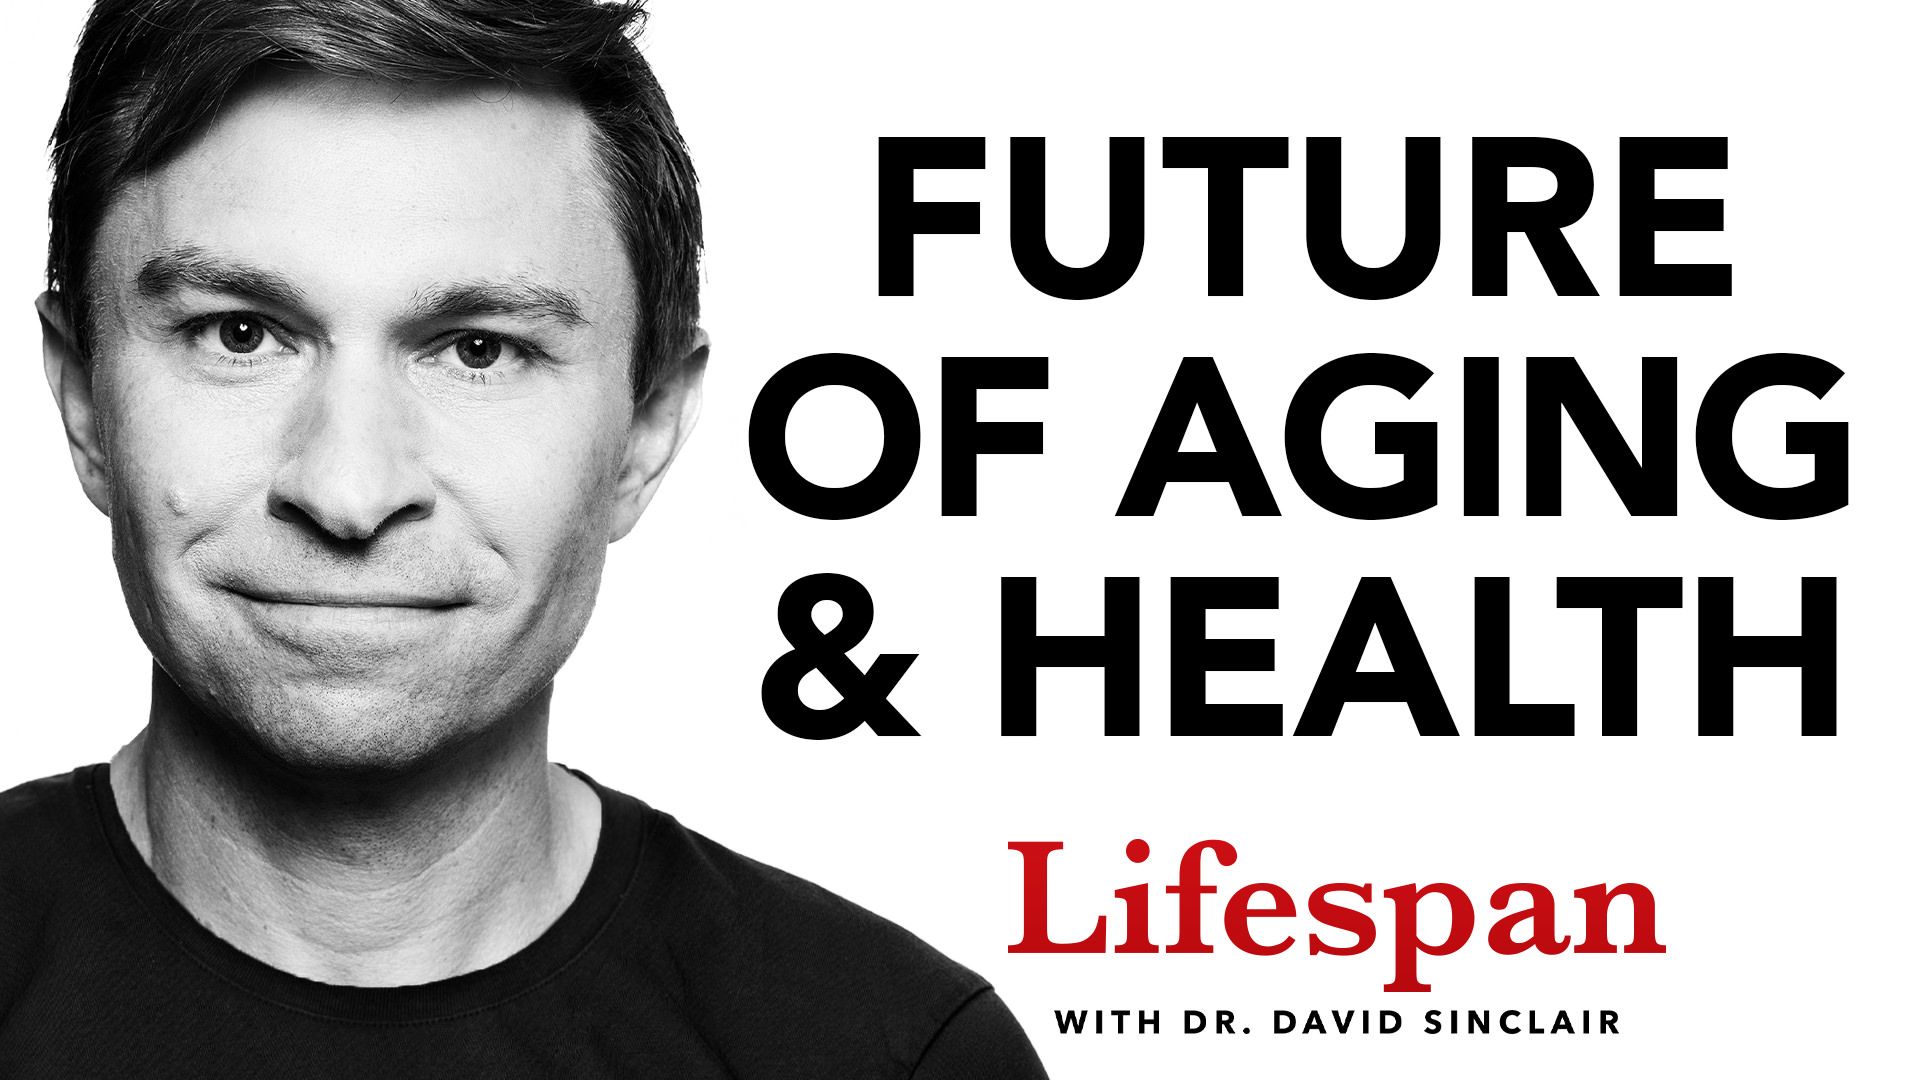 "Future of Aging & Health - Lifespan with Dr. David Sinclair"